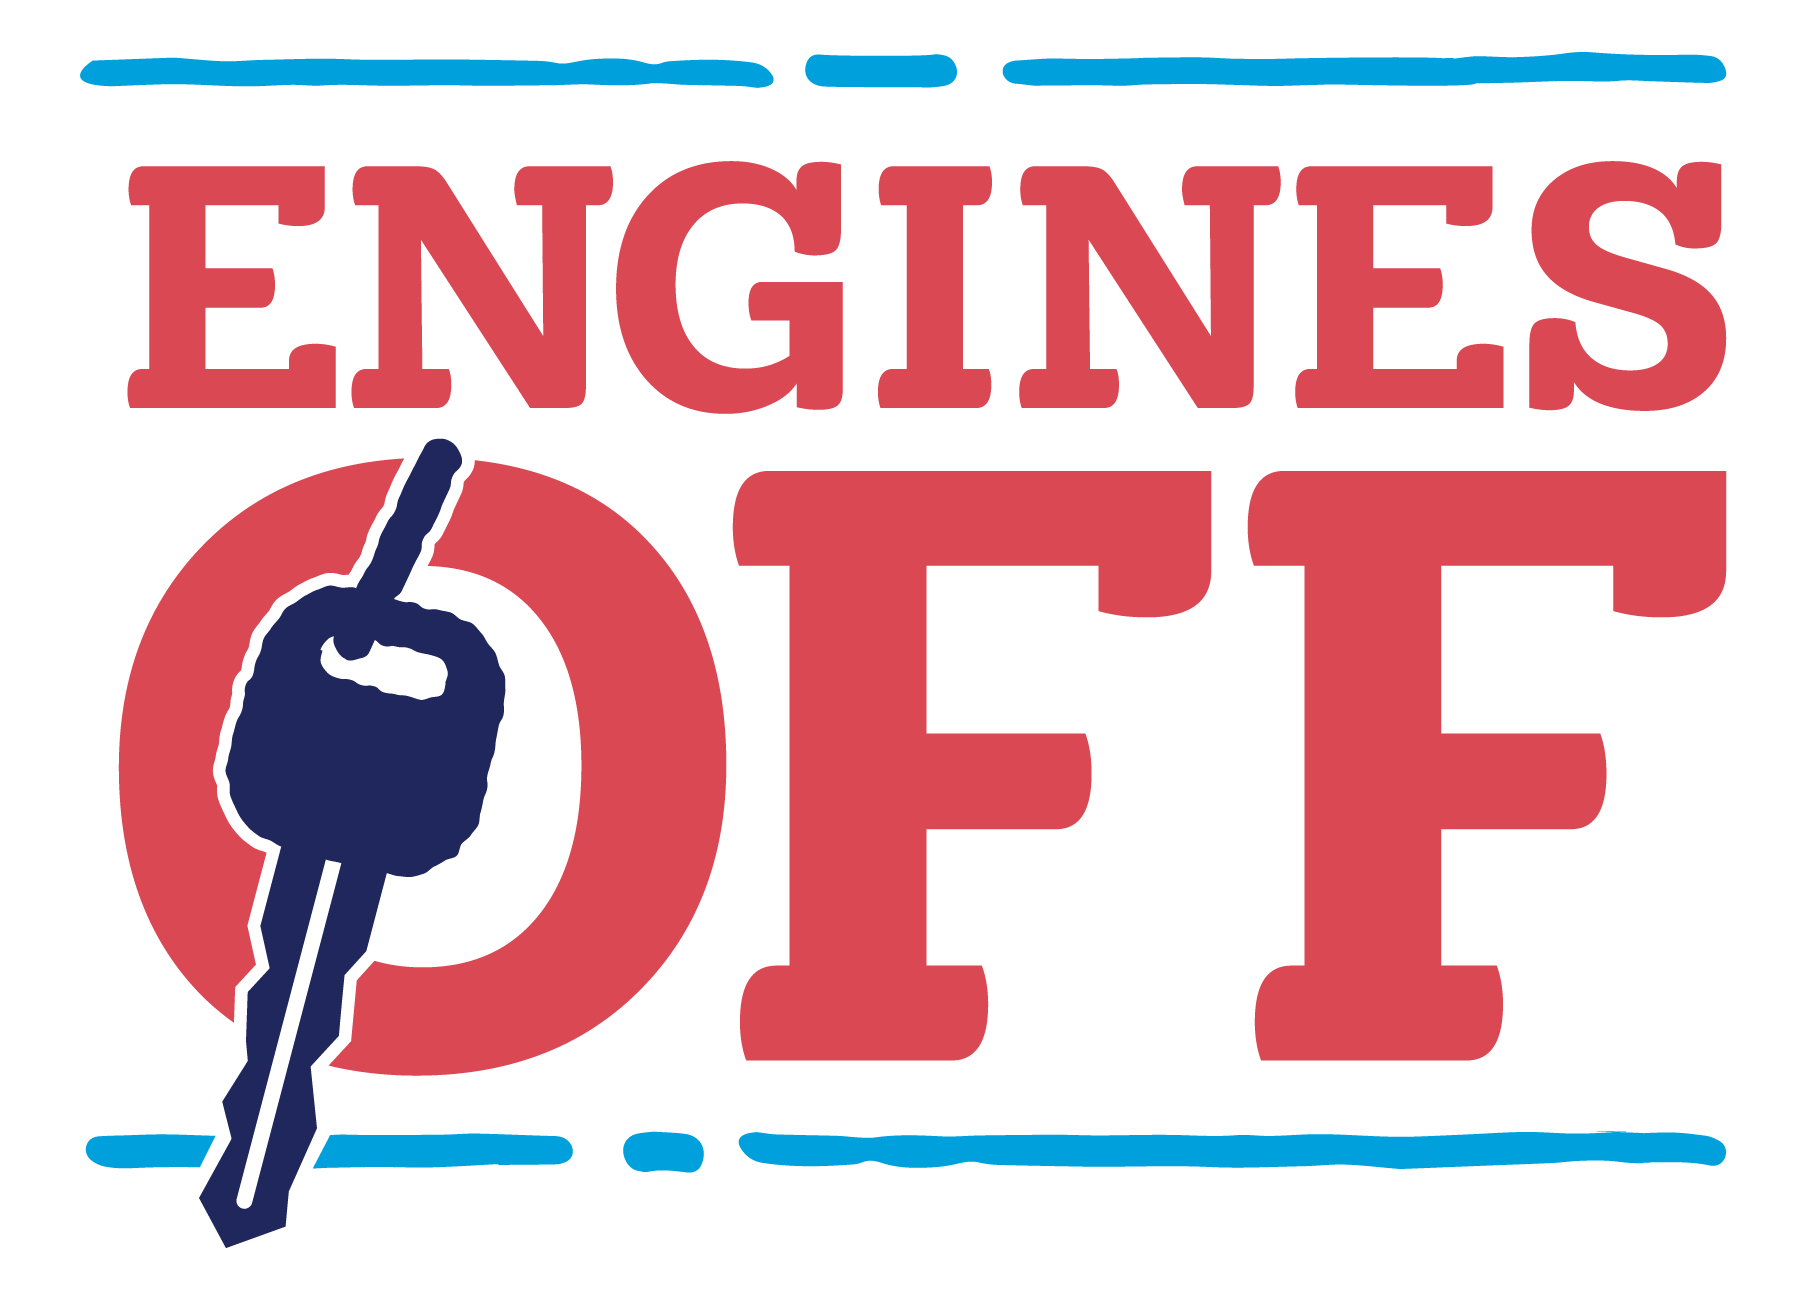 Engines Off Logo is a red and blue logo with a key